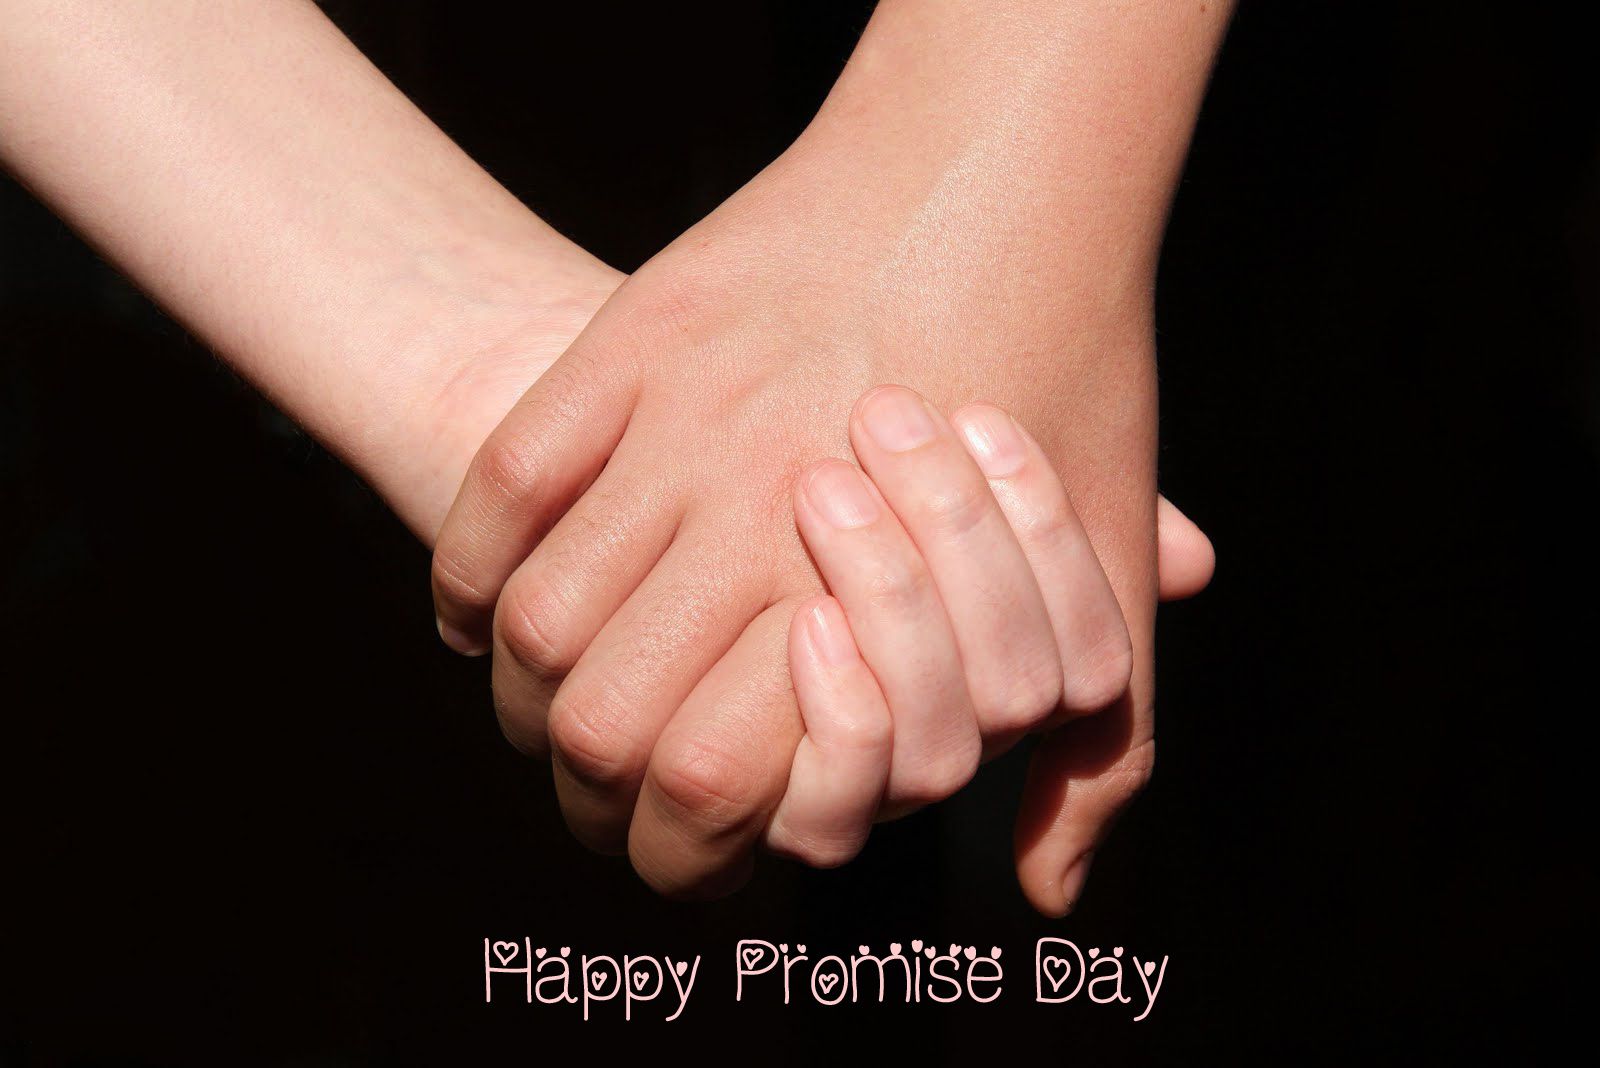 Promise Day Wallpapers for Mobile & Desktop | CGfrog